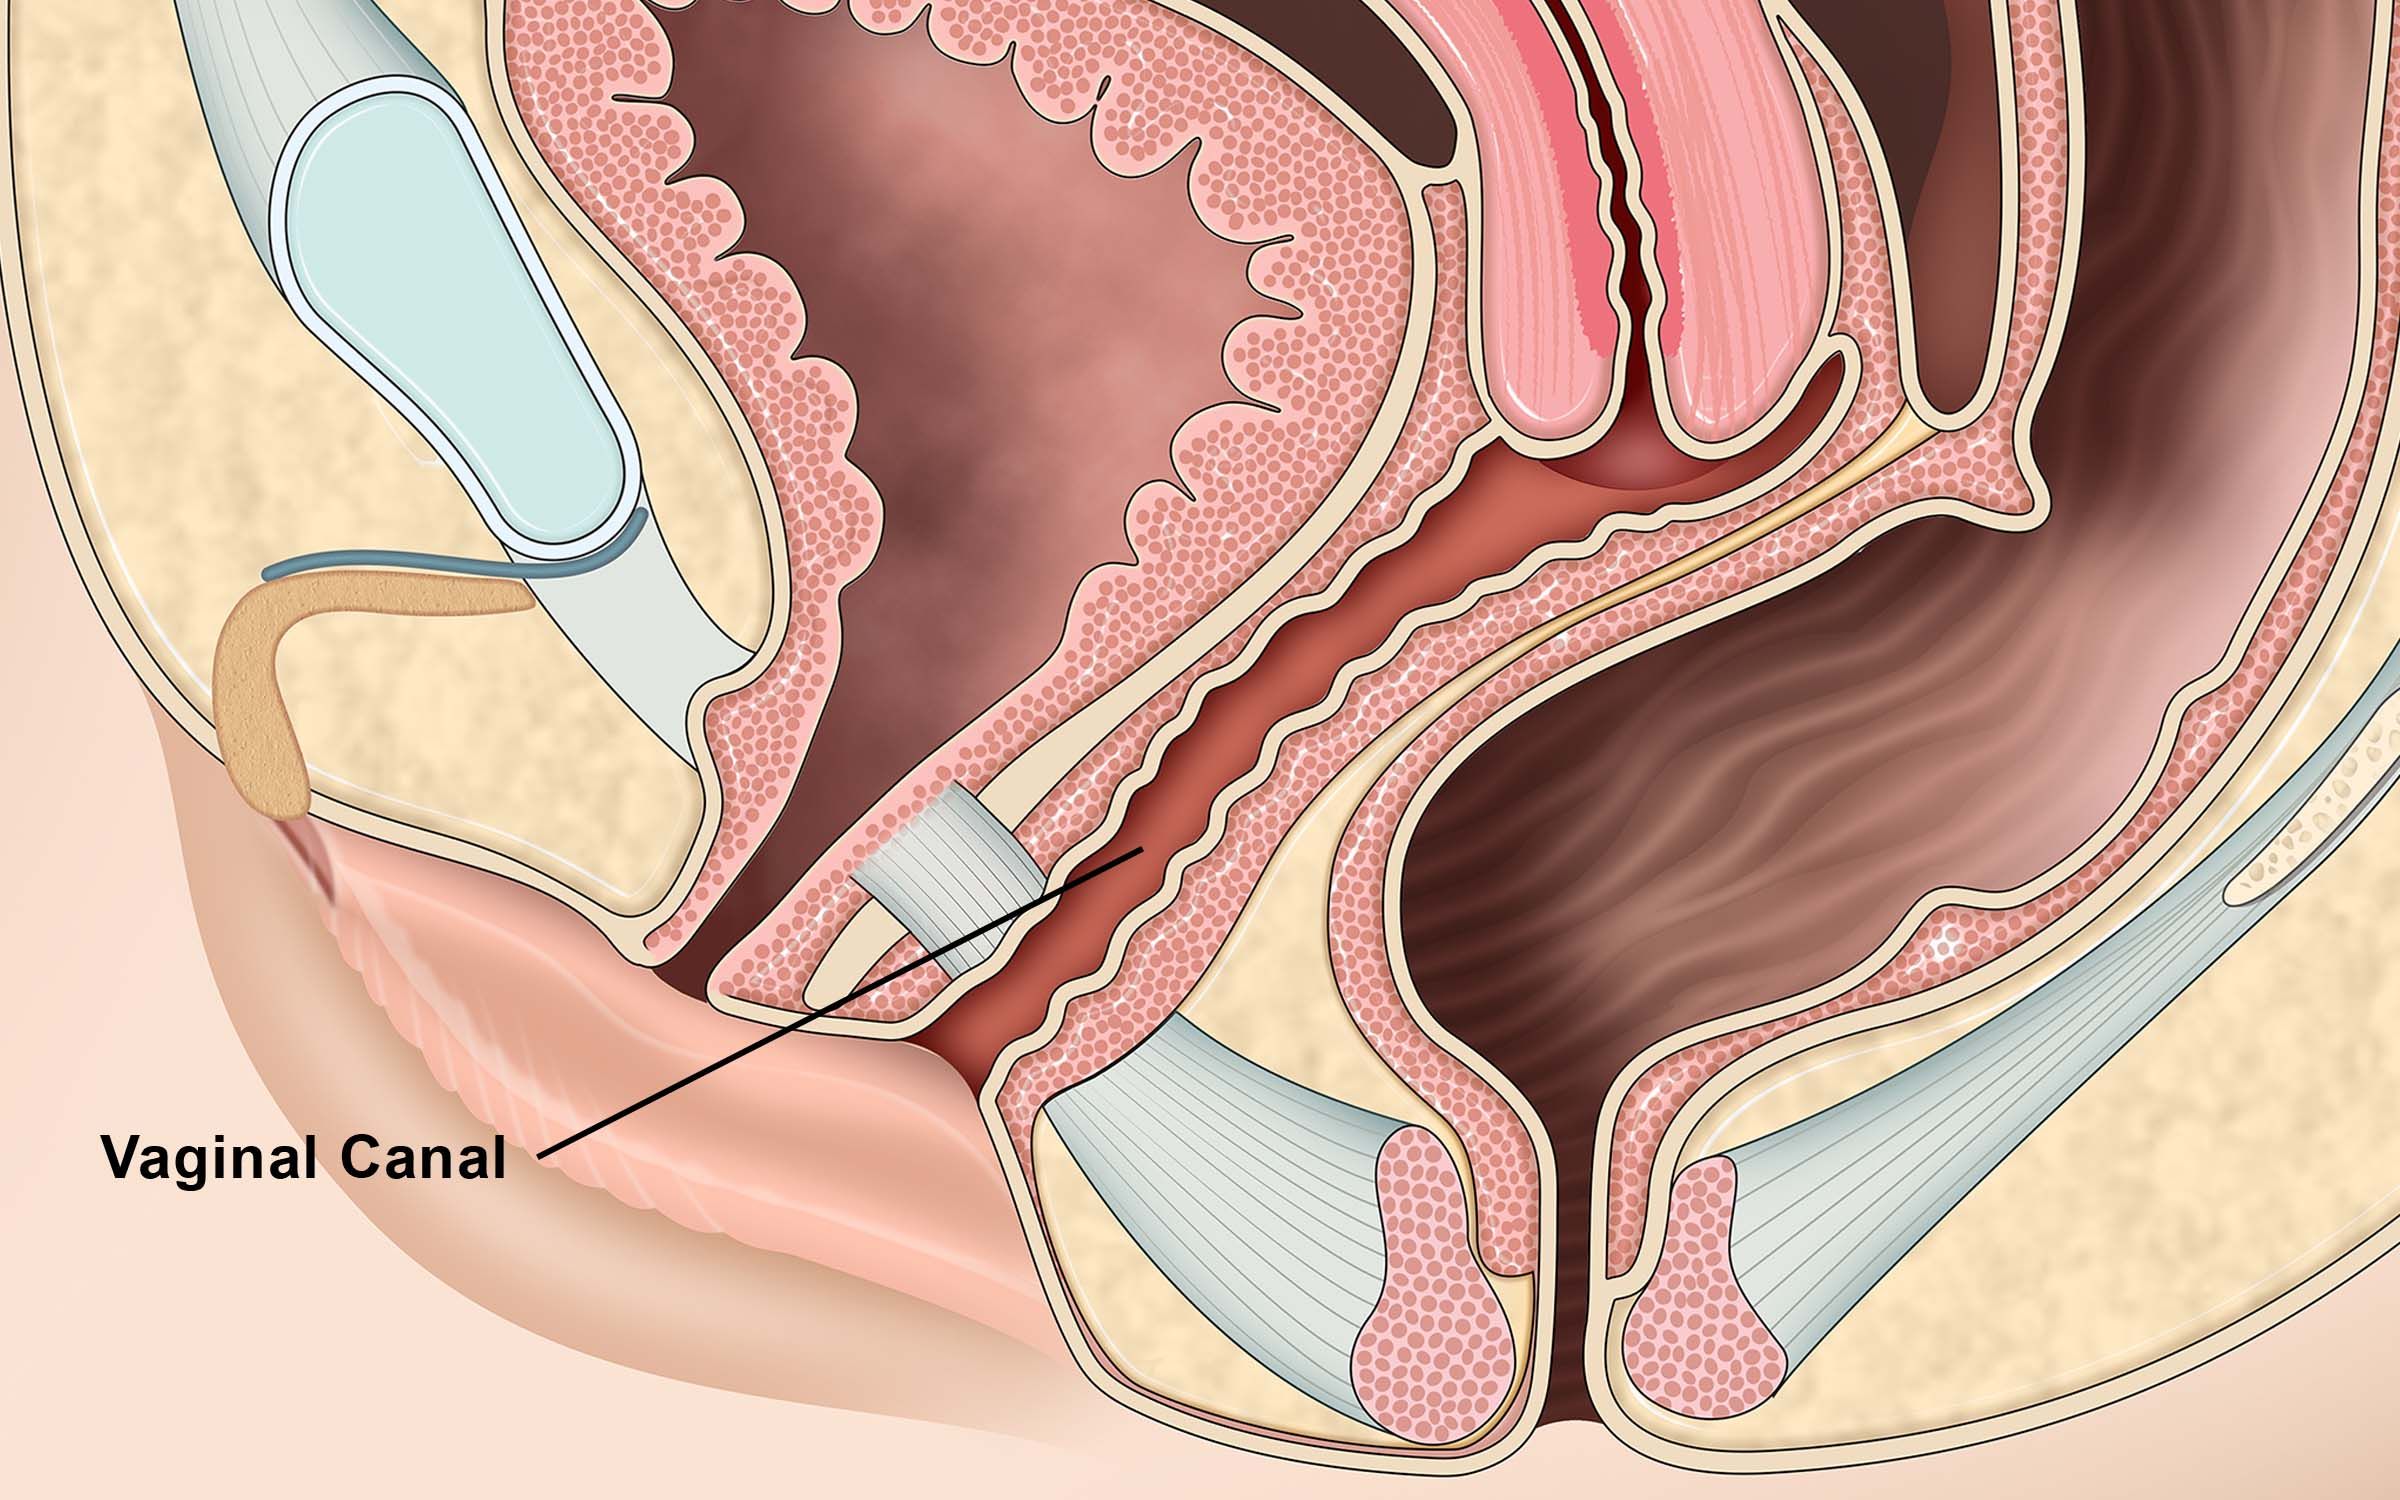 Anatomy of the Vaginal Canal